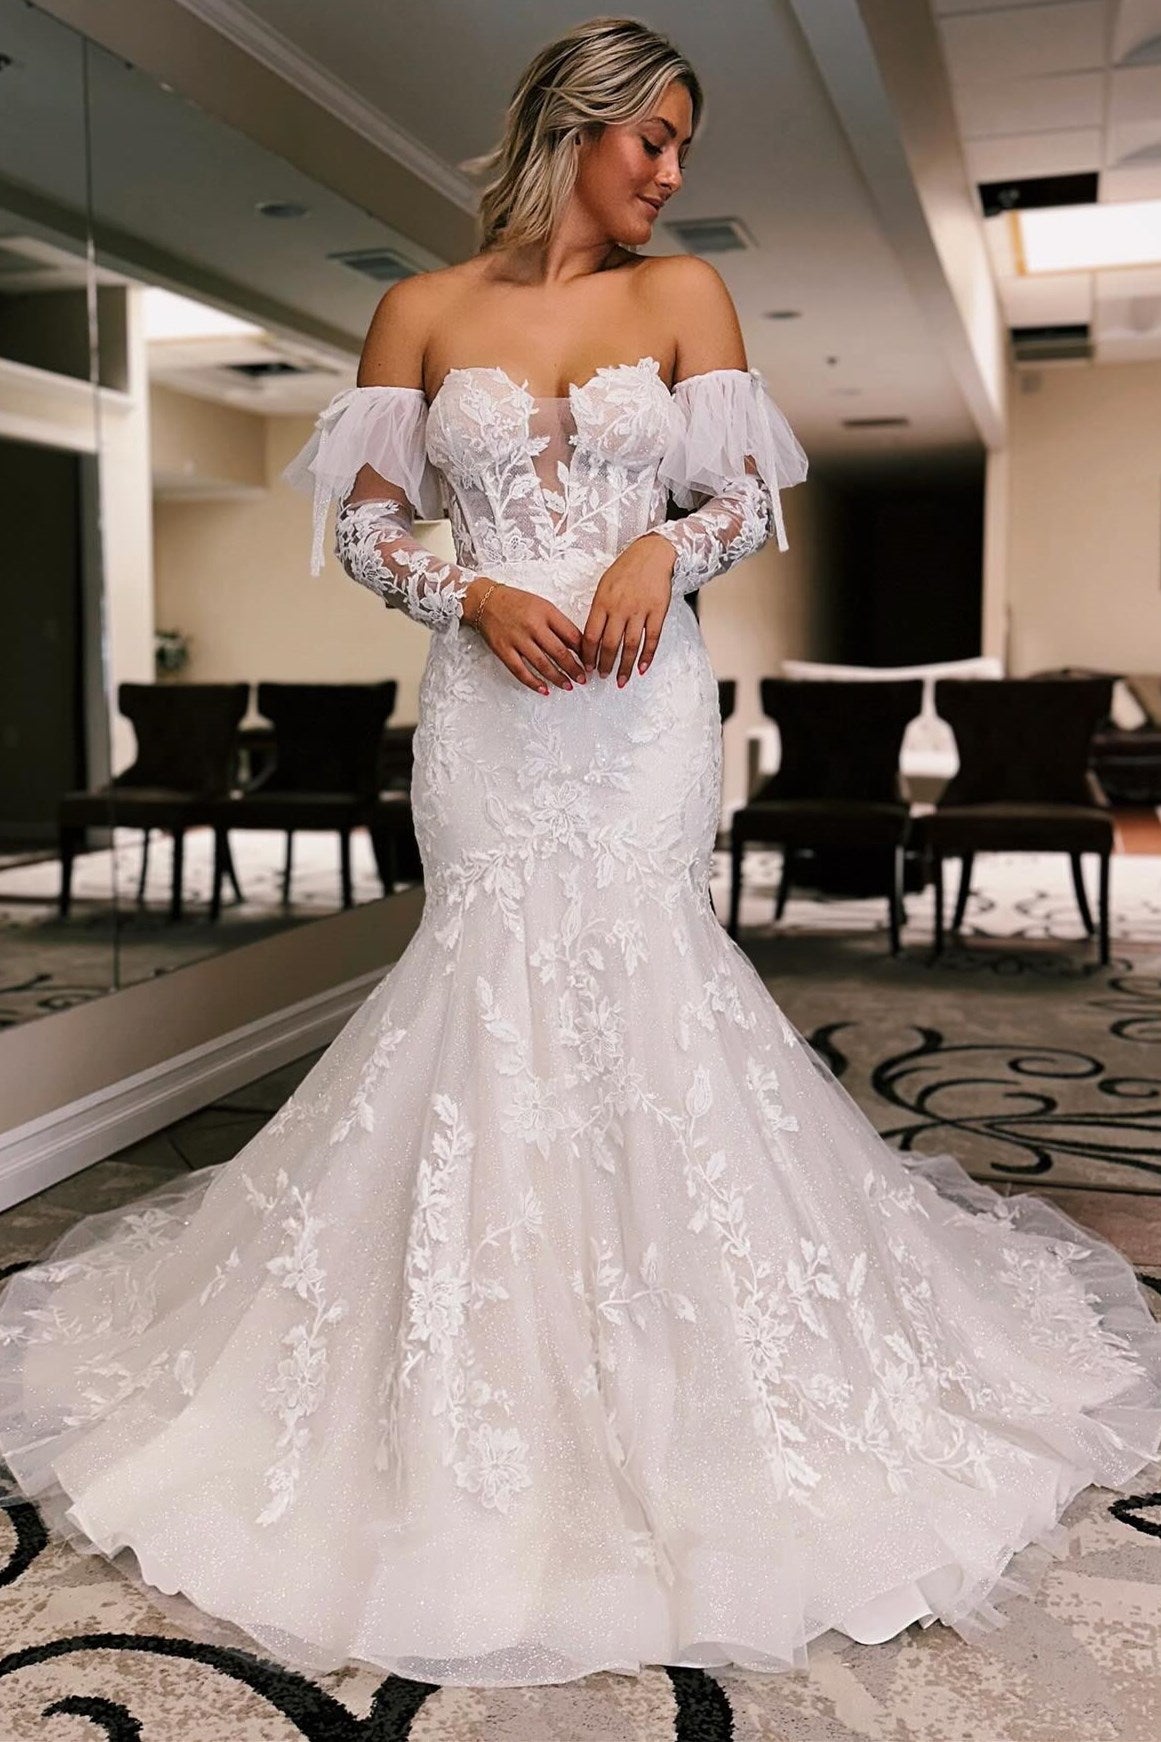 Baylor | White Floral Lace Sweetheart Trumpet Wedding Dress with Detachable Sleeves